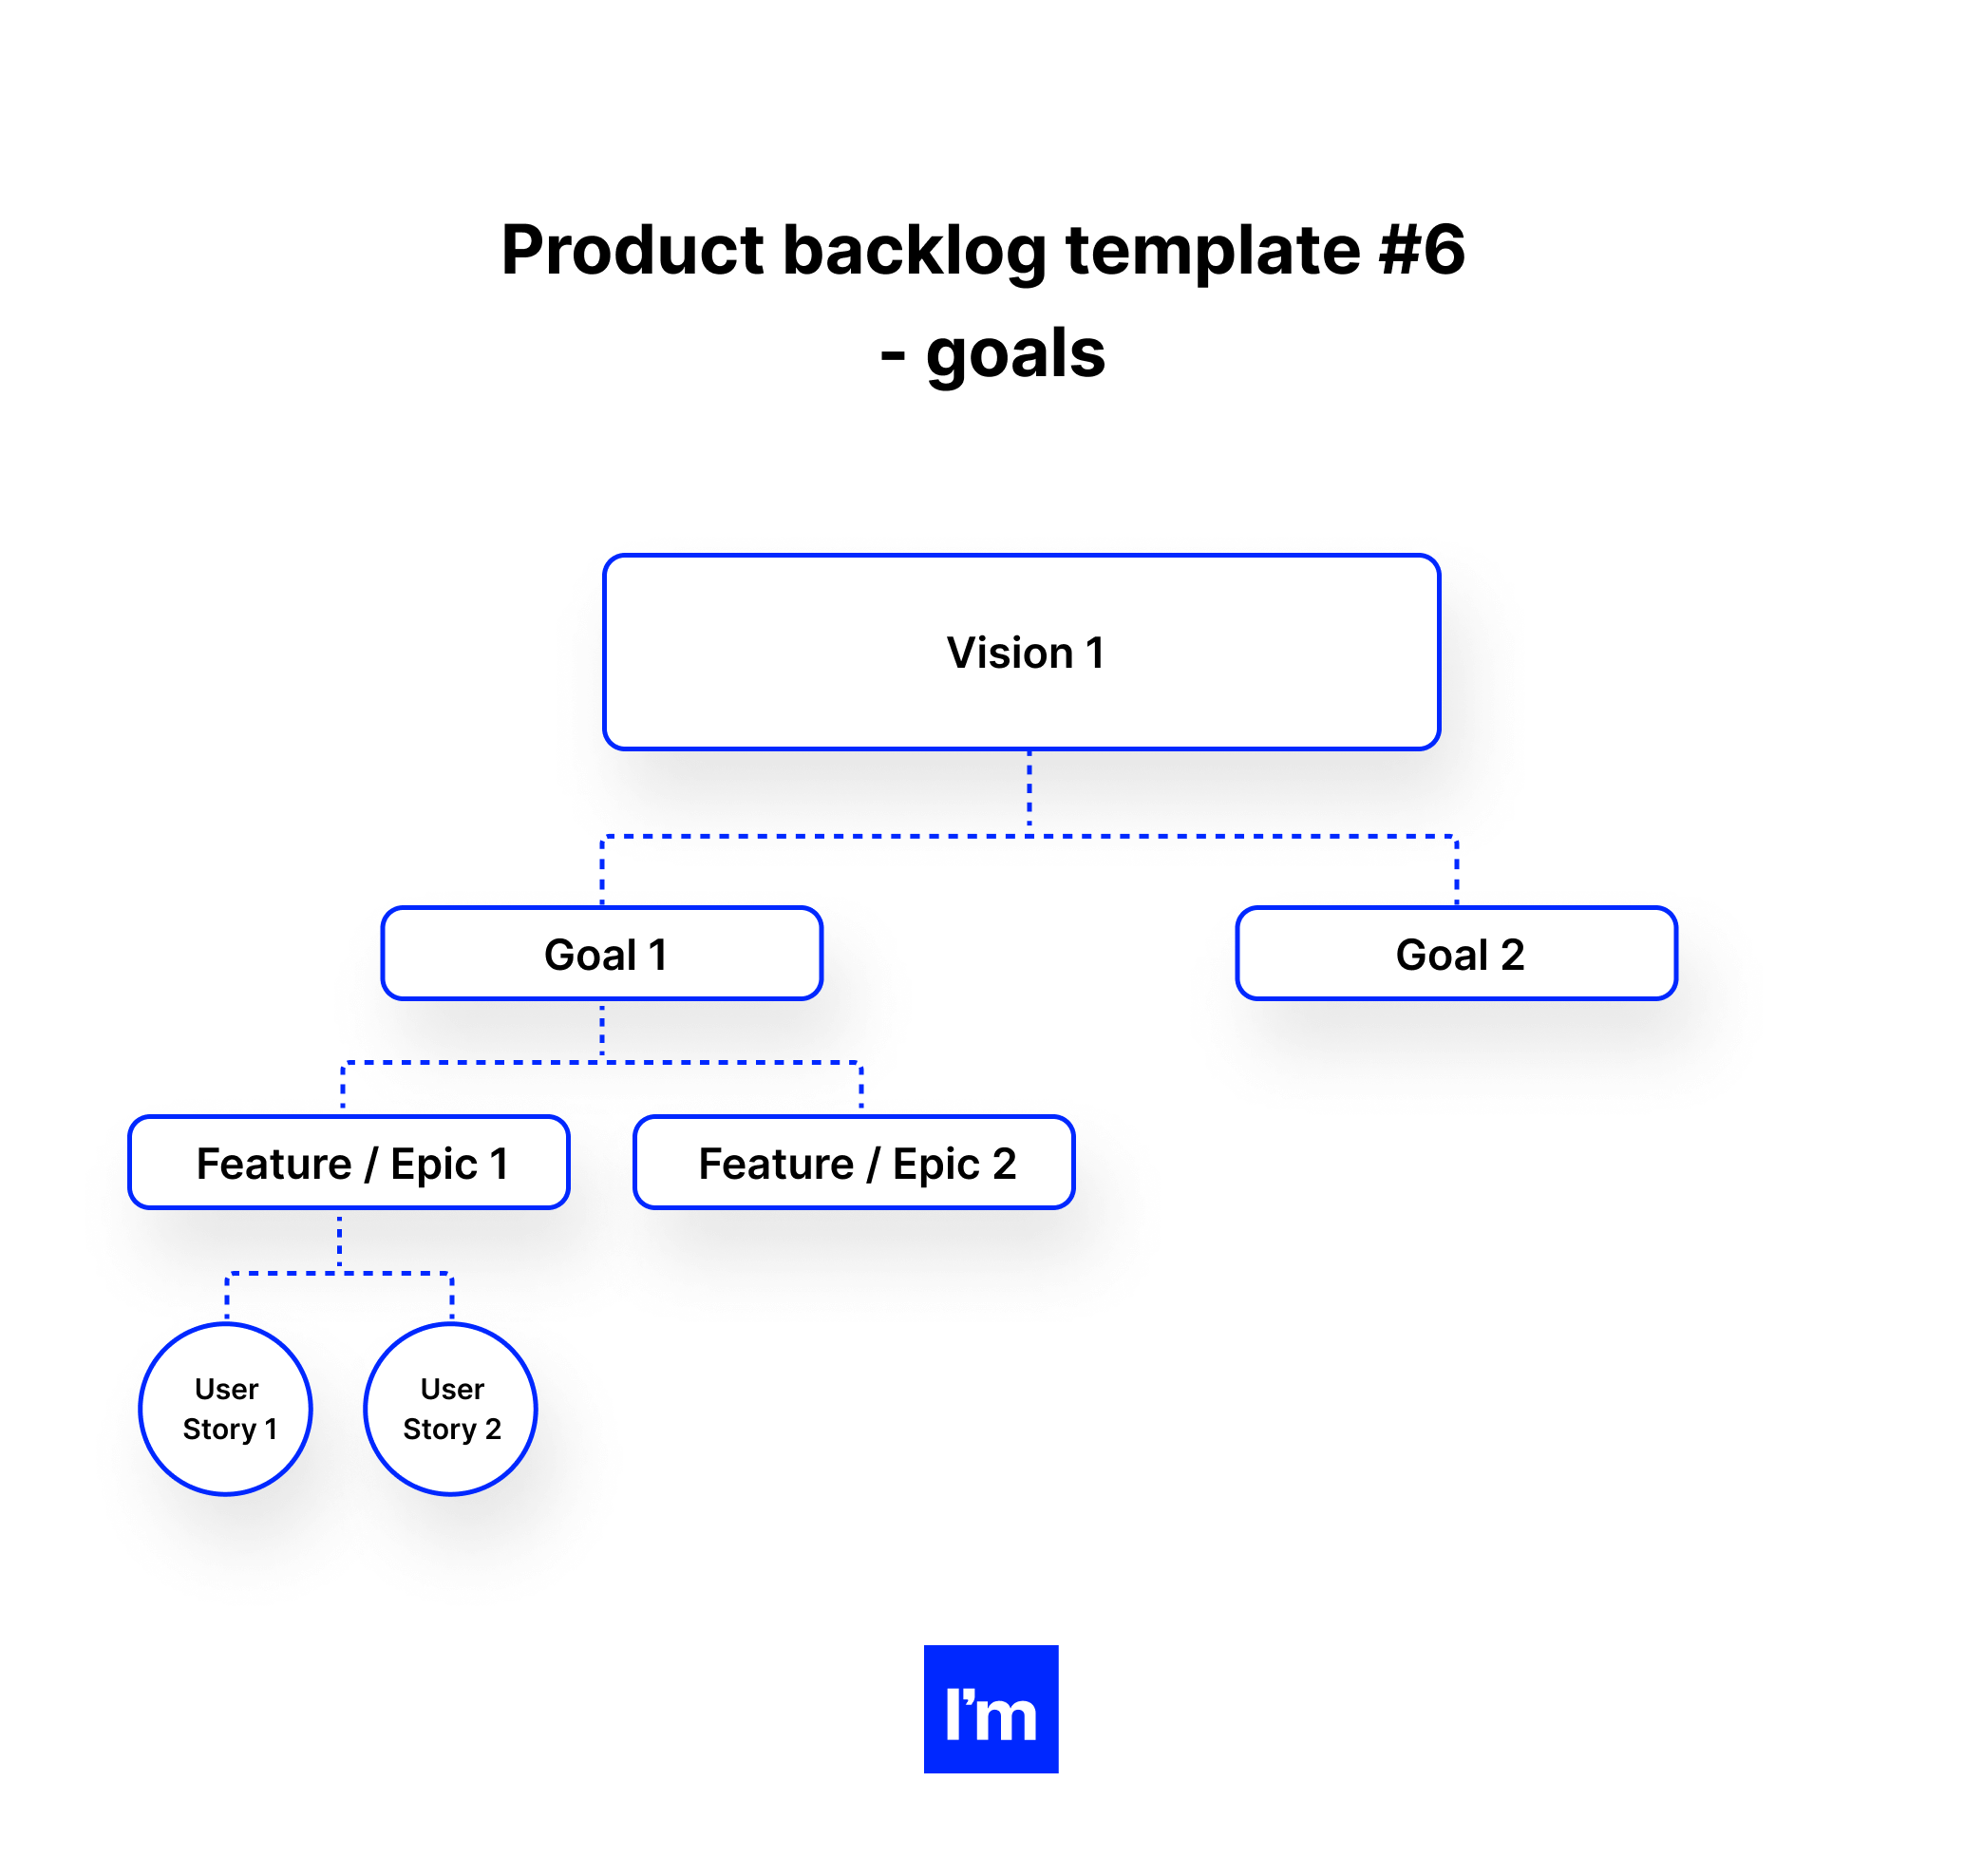 Product backlog template #6 - goals